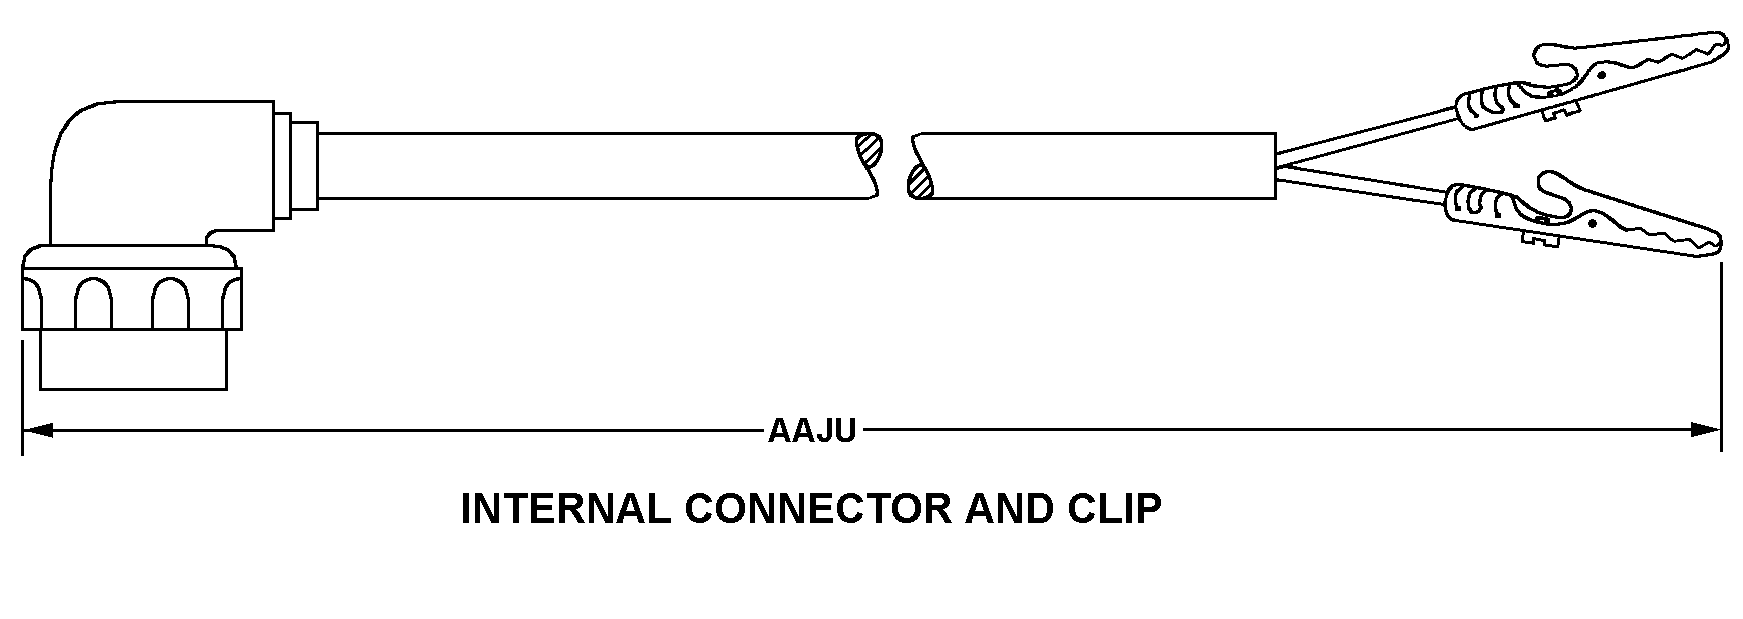 INTERNAL CONNECTOR AND CLIP style nsn 6150-01-054-0310